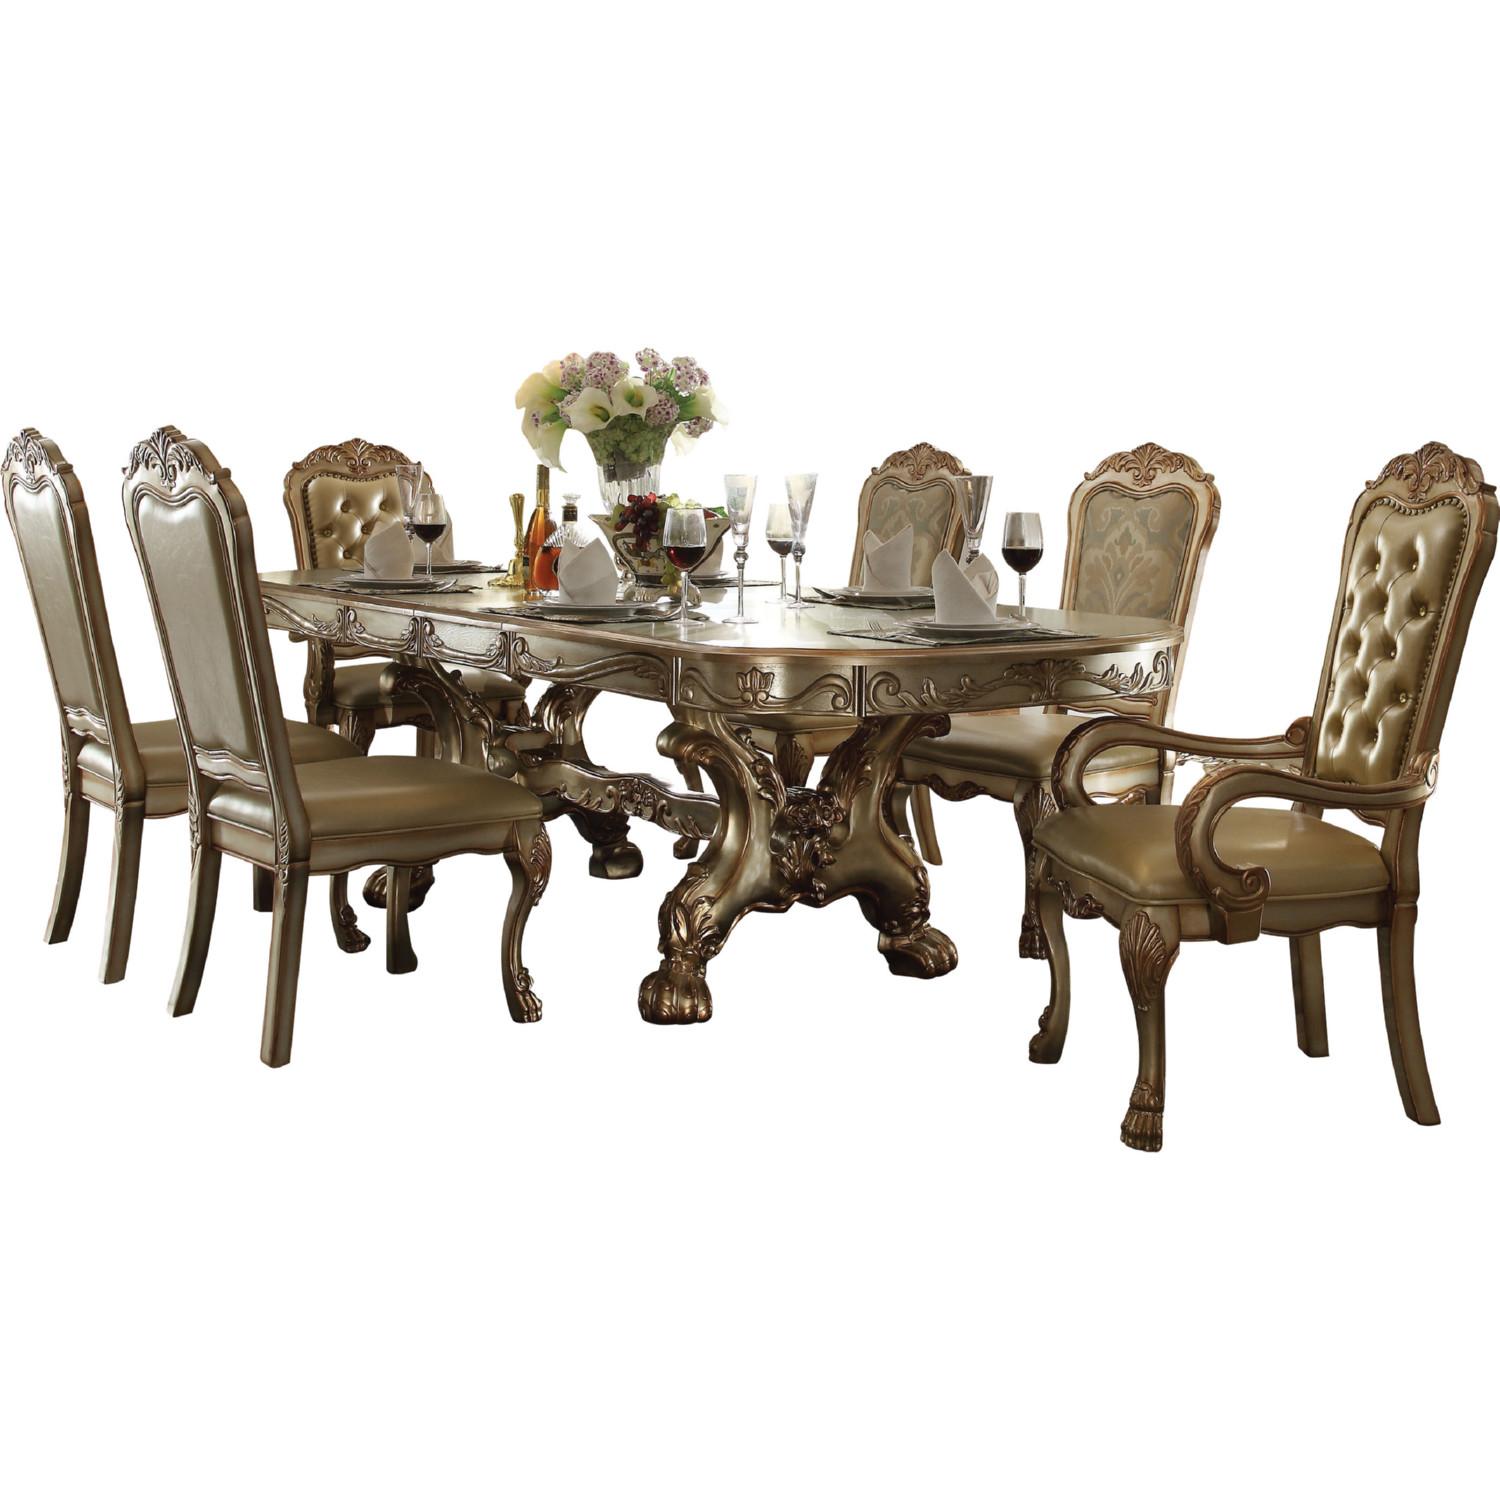 Classic, Traditional Dining Table Set Dresden 63150 63150 Dresden-Set-7 in Bone, Gold Polyurethane